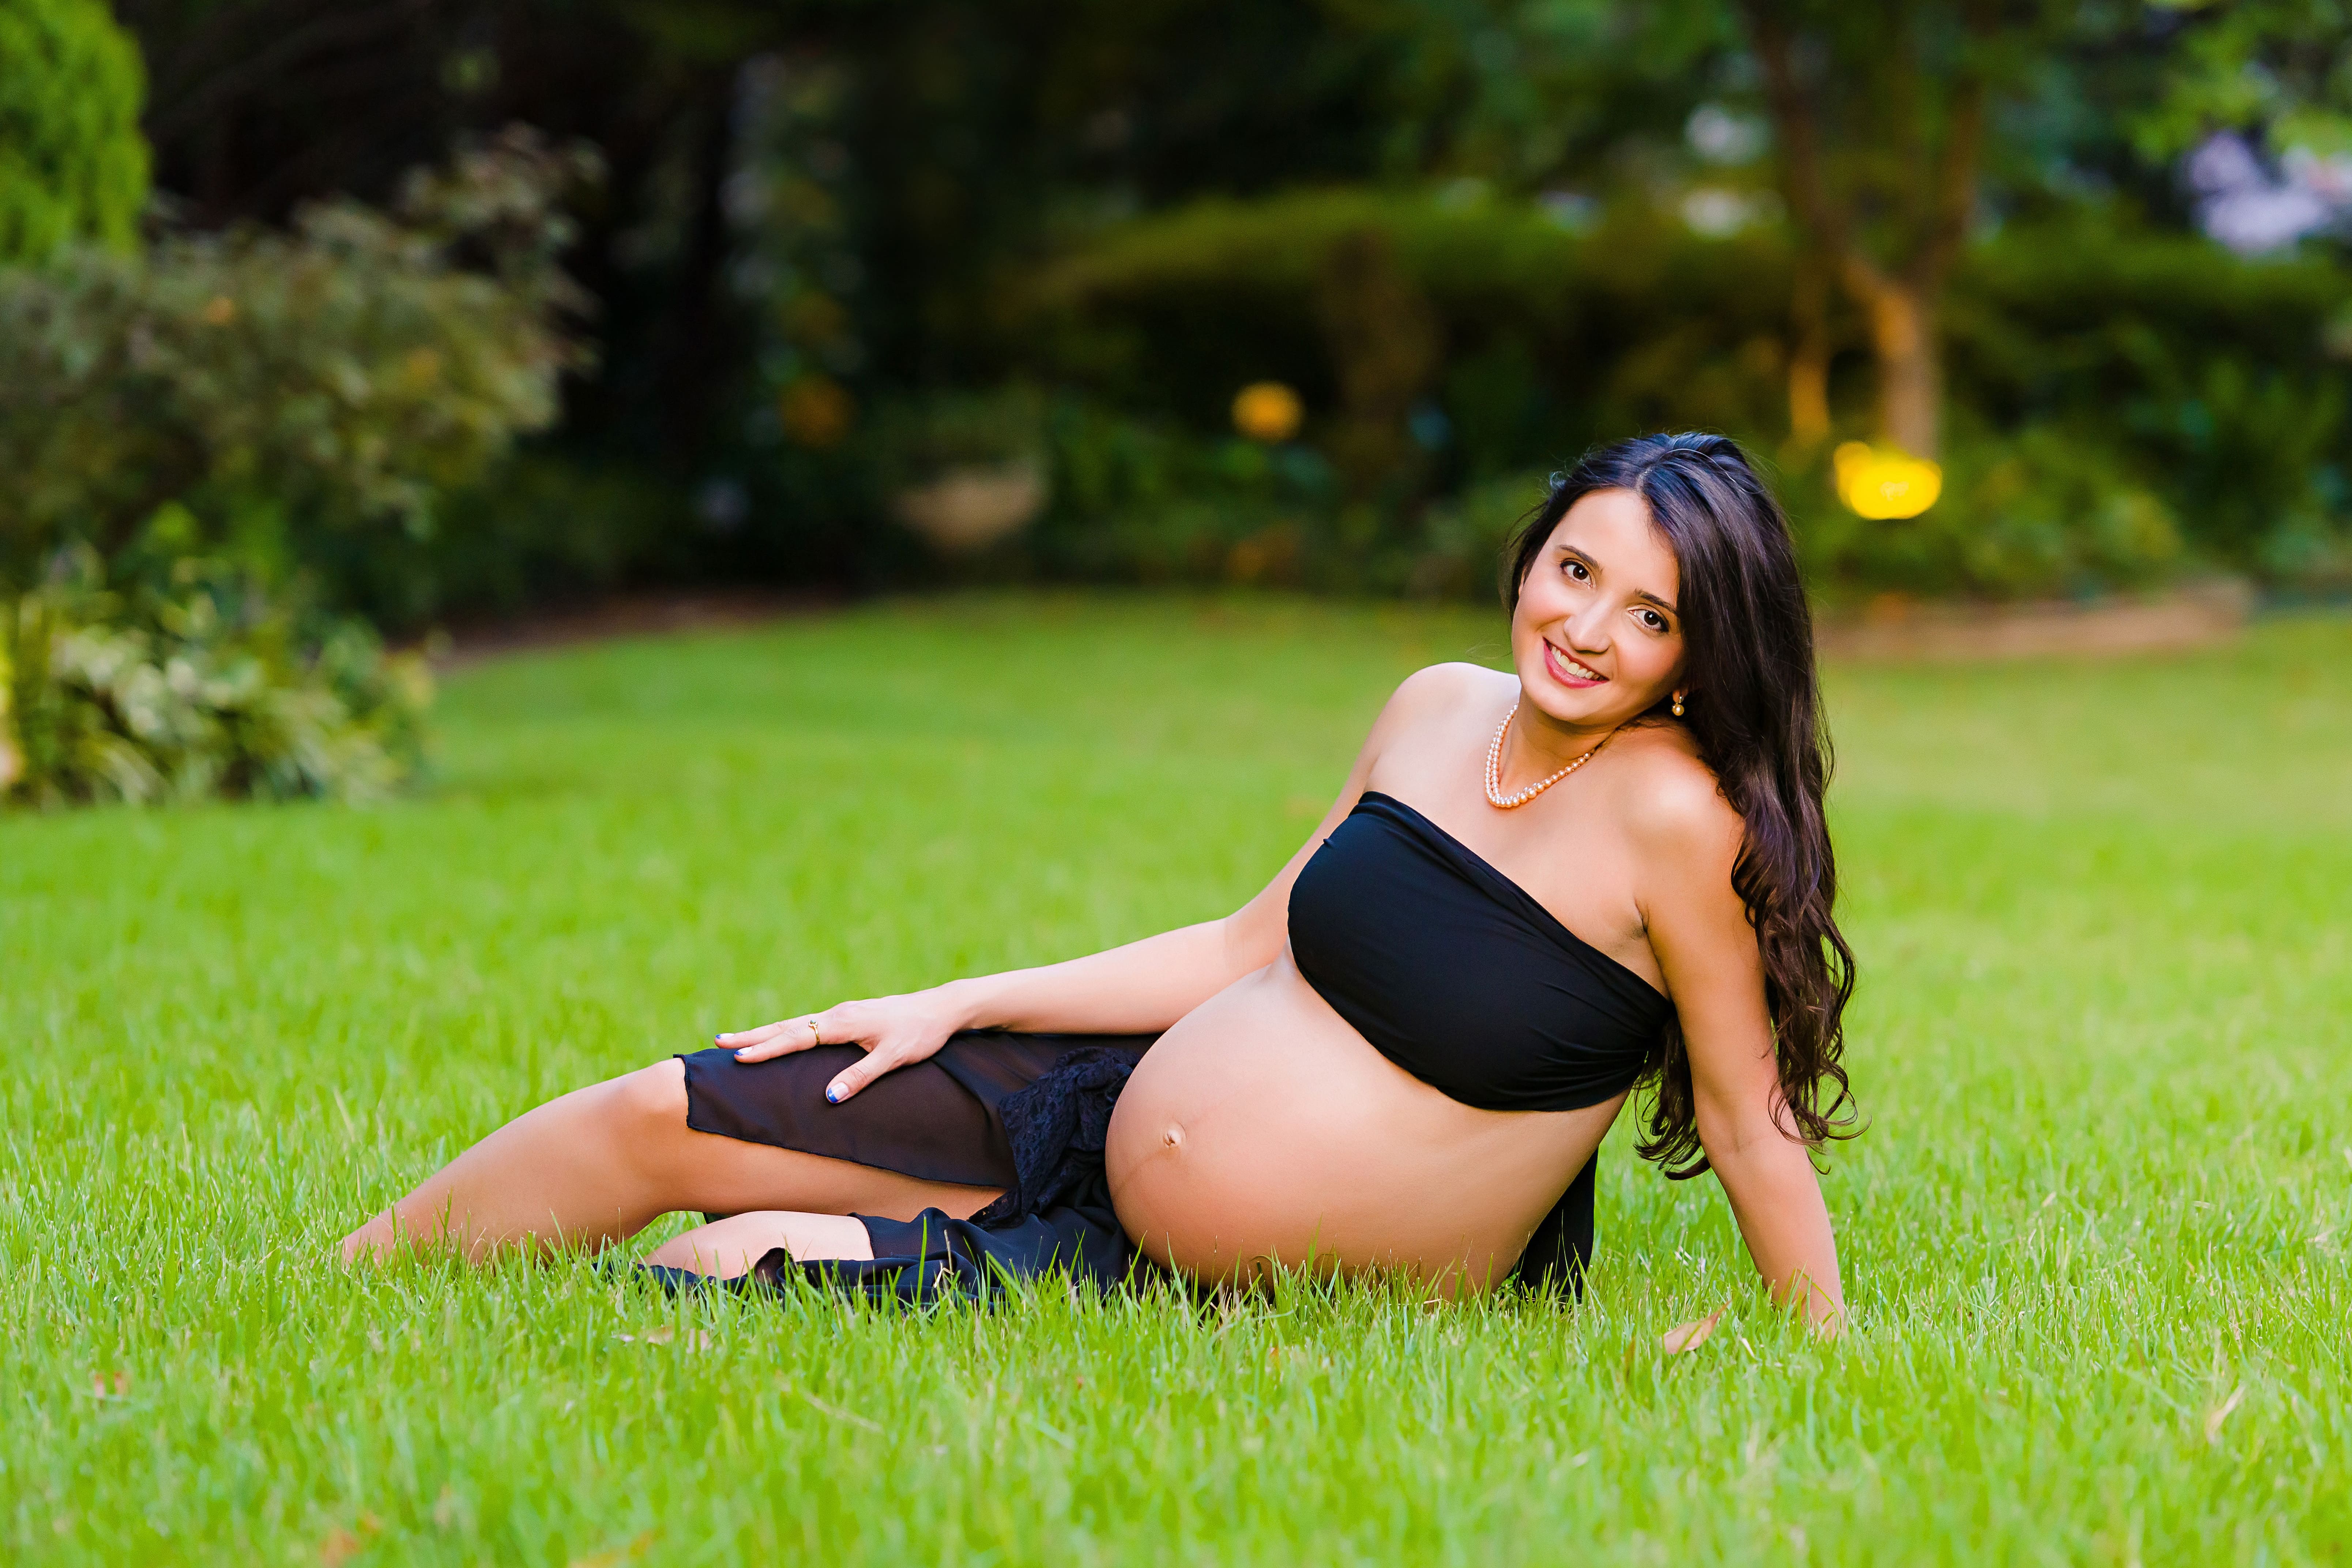 Pregnant woman in the grass for a maternity photo shoot